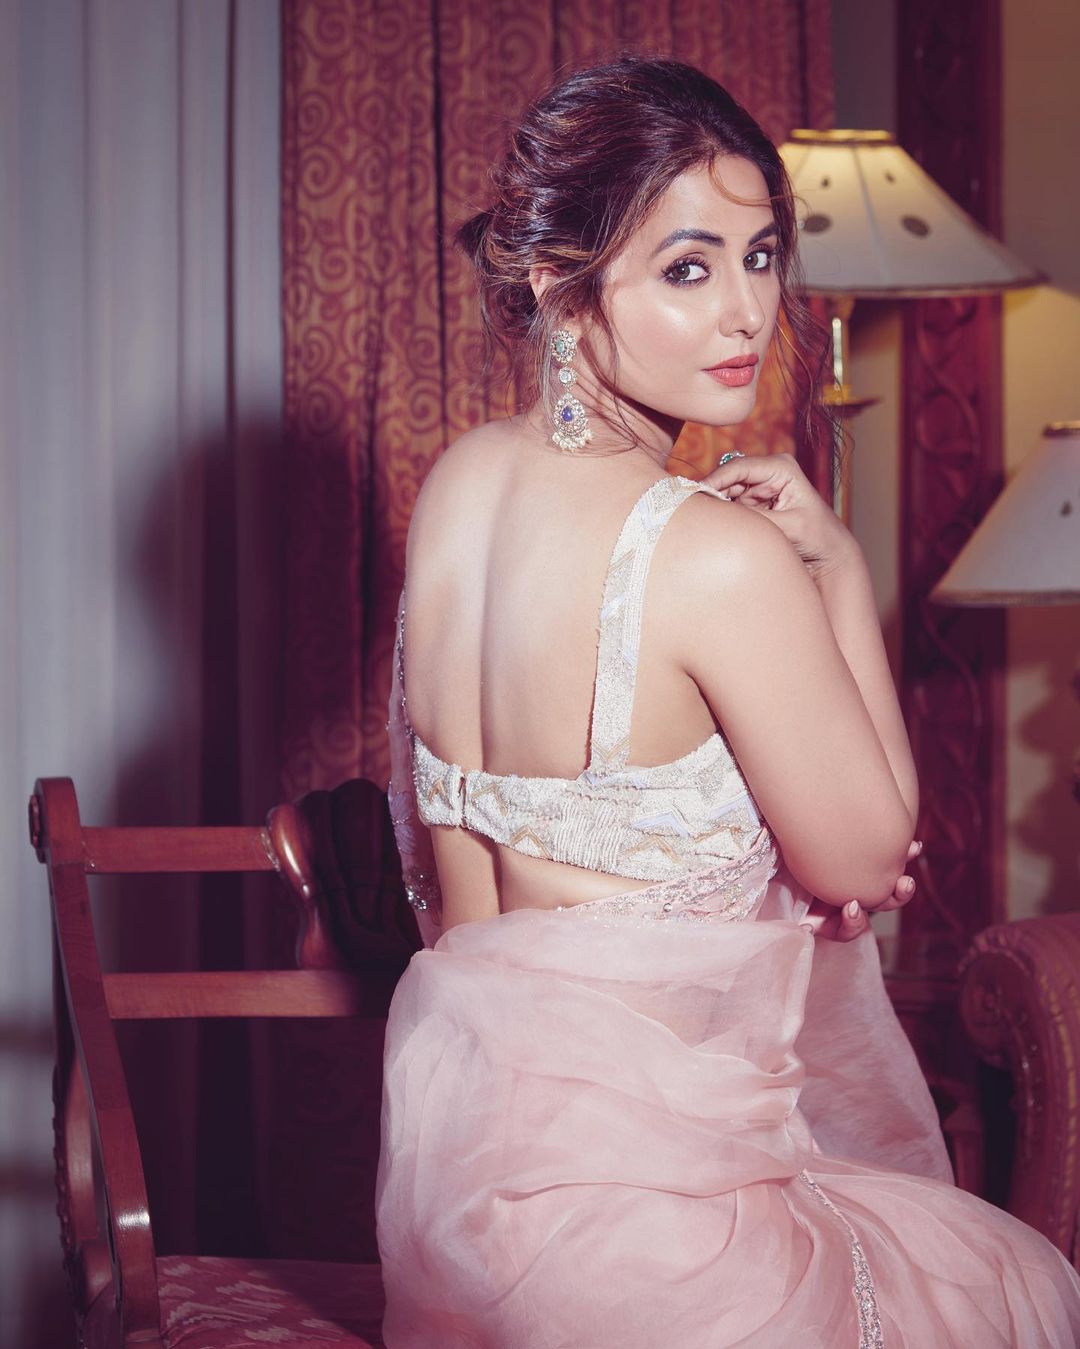 Hina Khan sure knows how to make heads turn with her photoshoots.